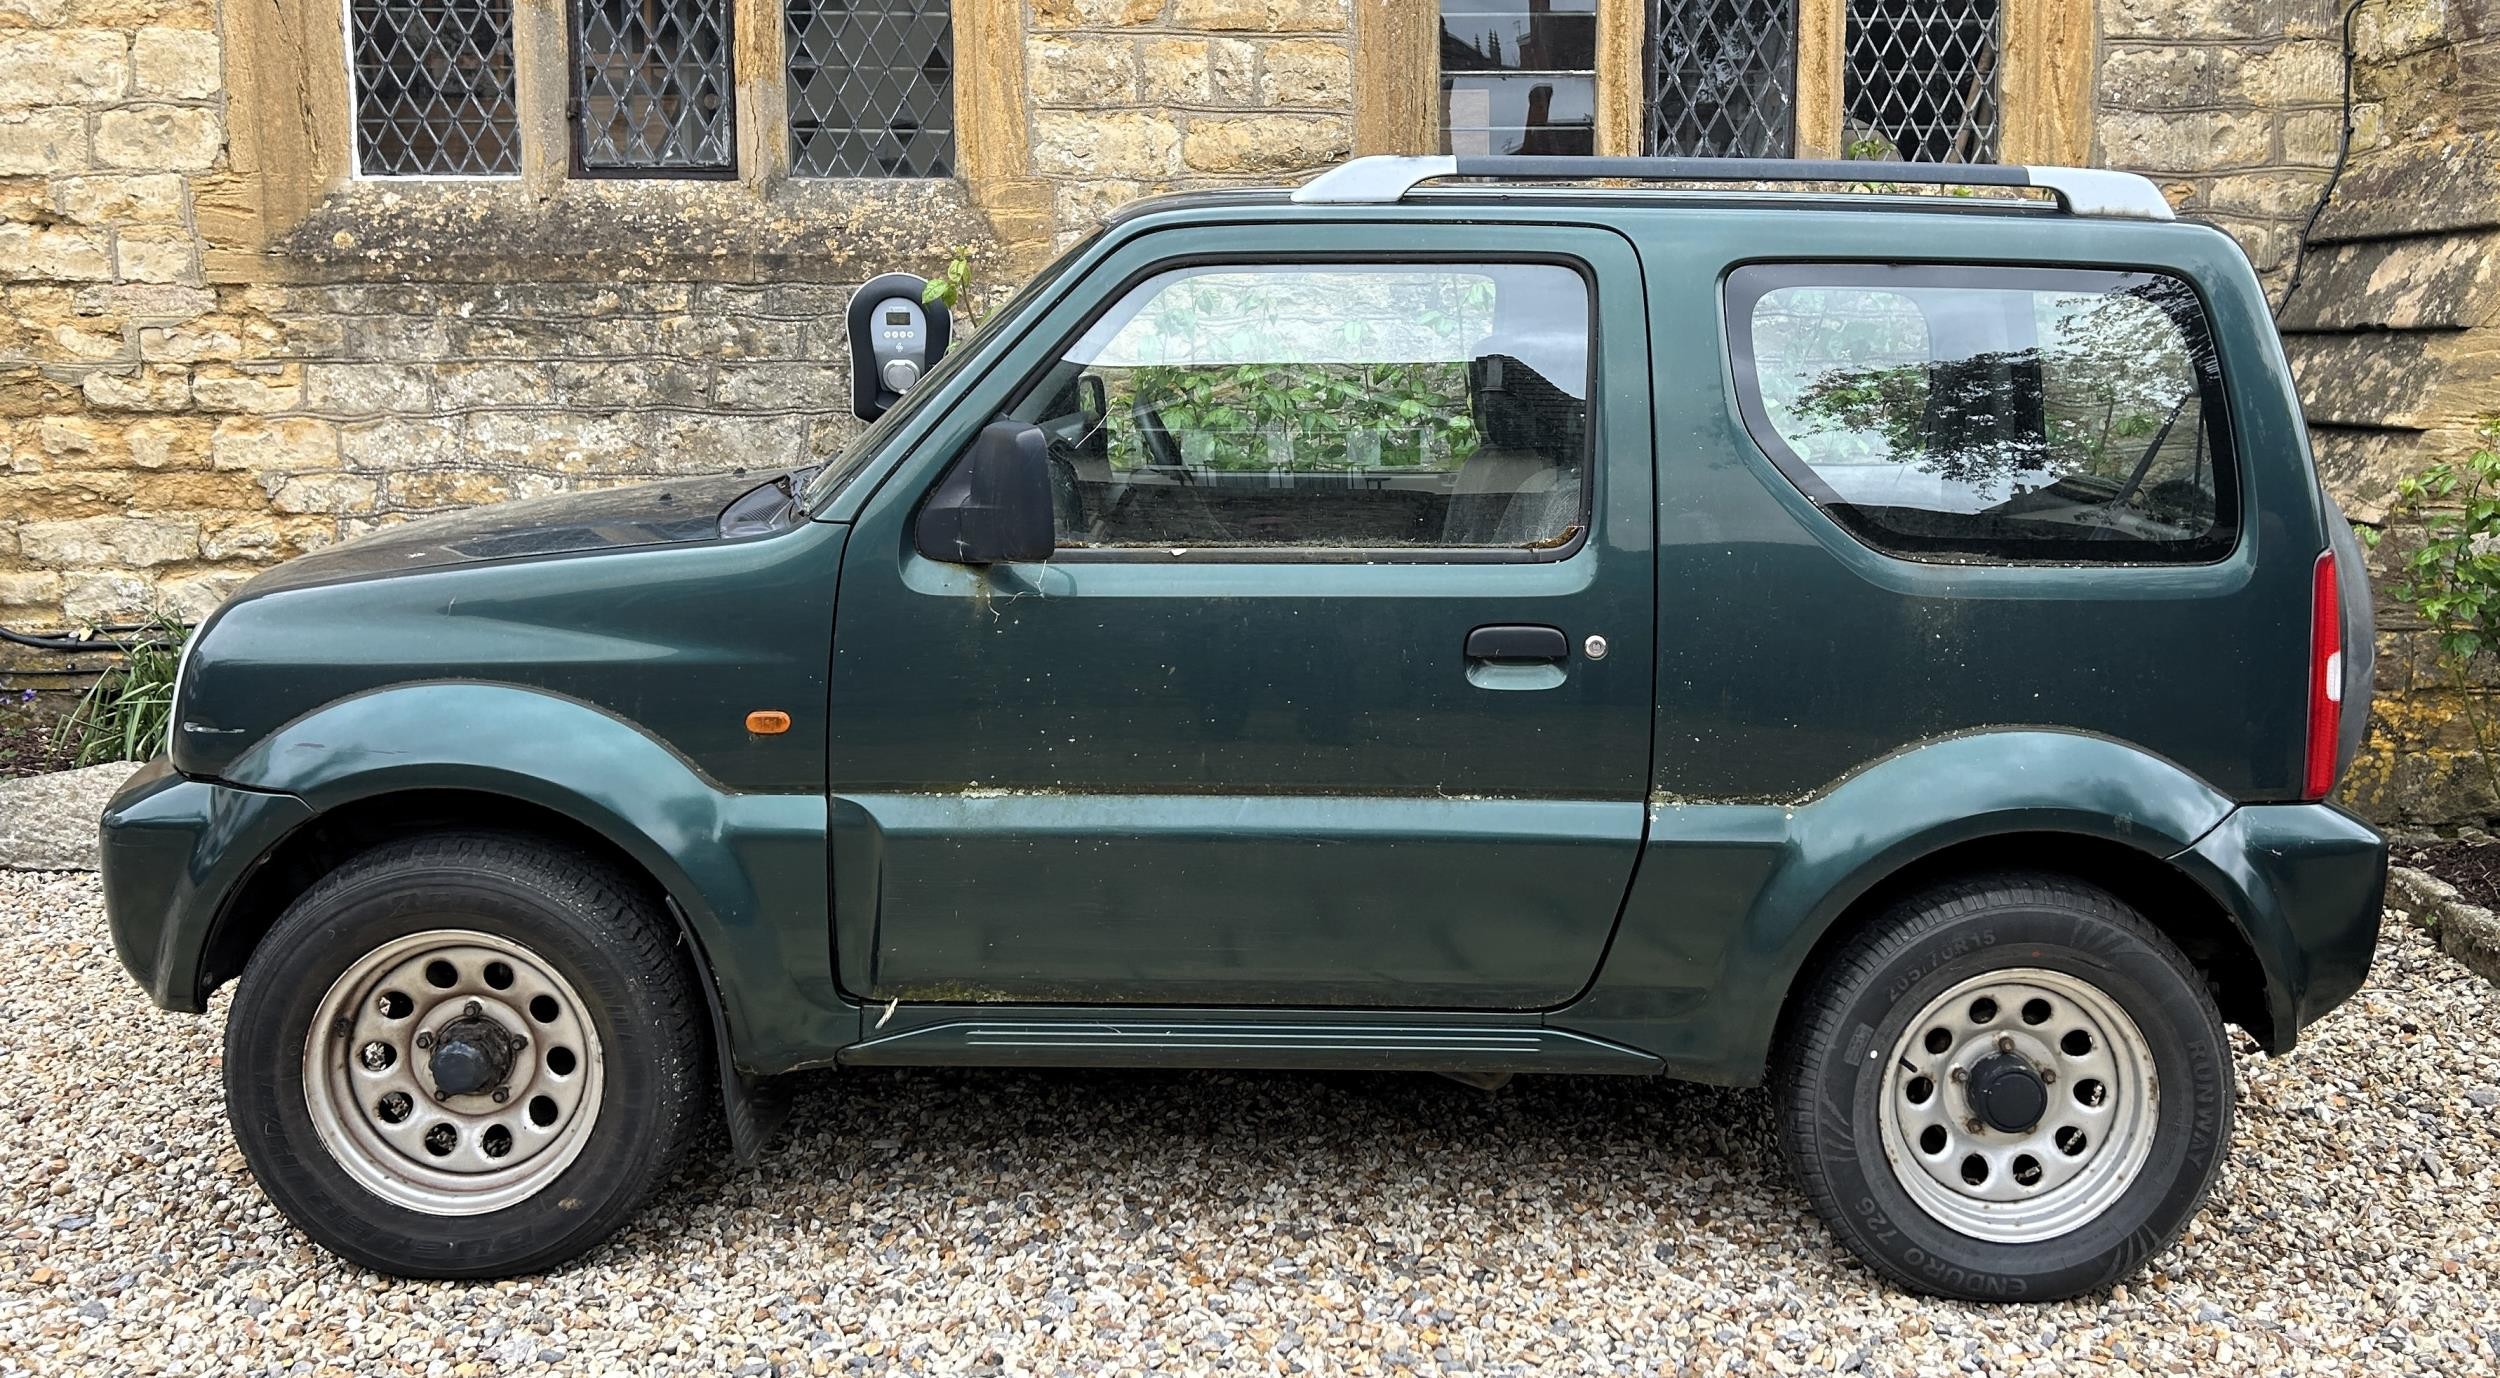 On Instructions of the Executors: A 1999 Suzuki Jimny JLX, registration number V995 JAF, chassis - Image 3 of 13